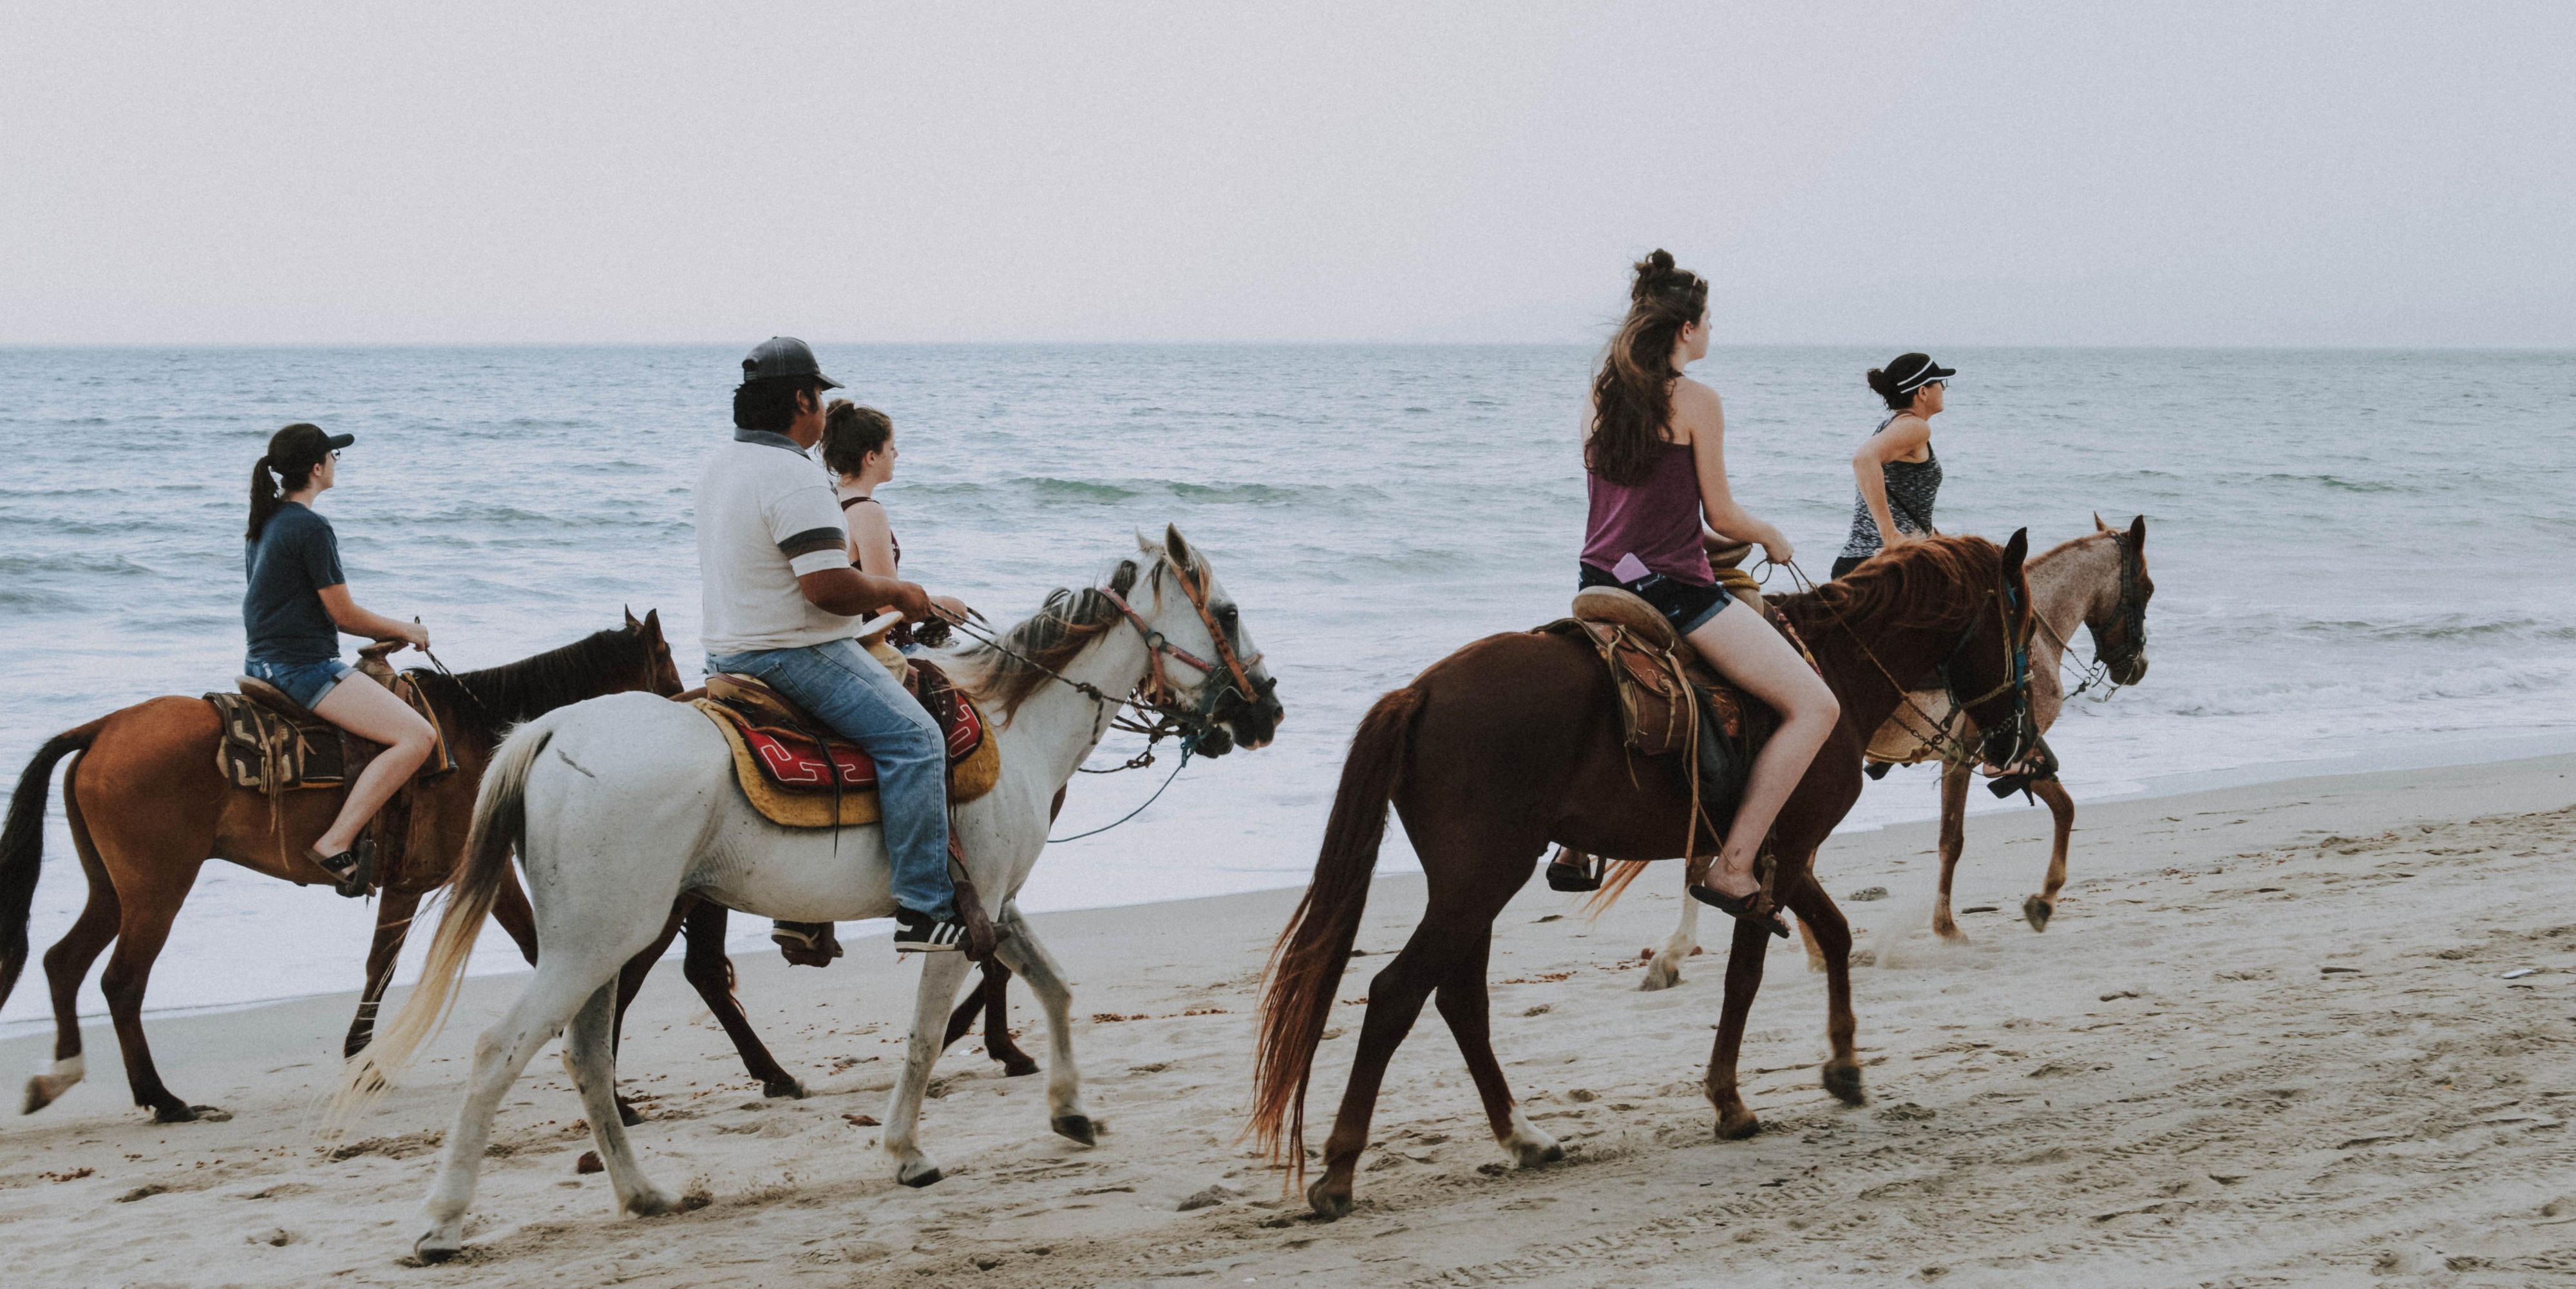 Horses on The Beach offers daily horseback rides on the beaches of North Padre Island. For more information see the website link below or call 361-949-4944.